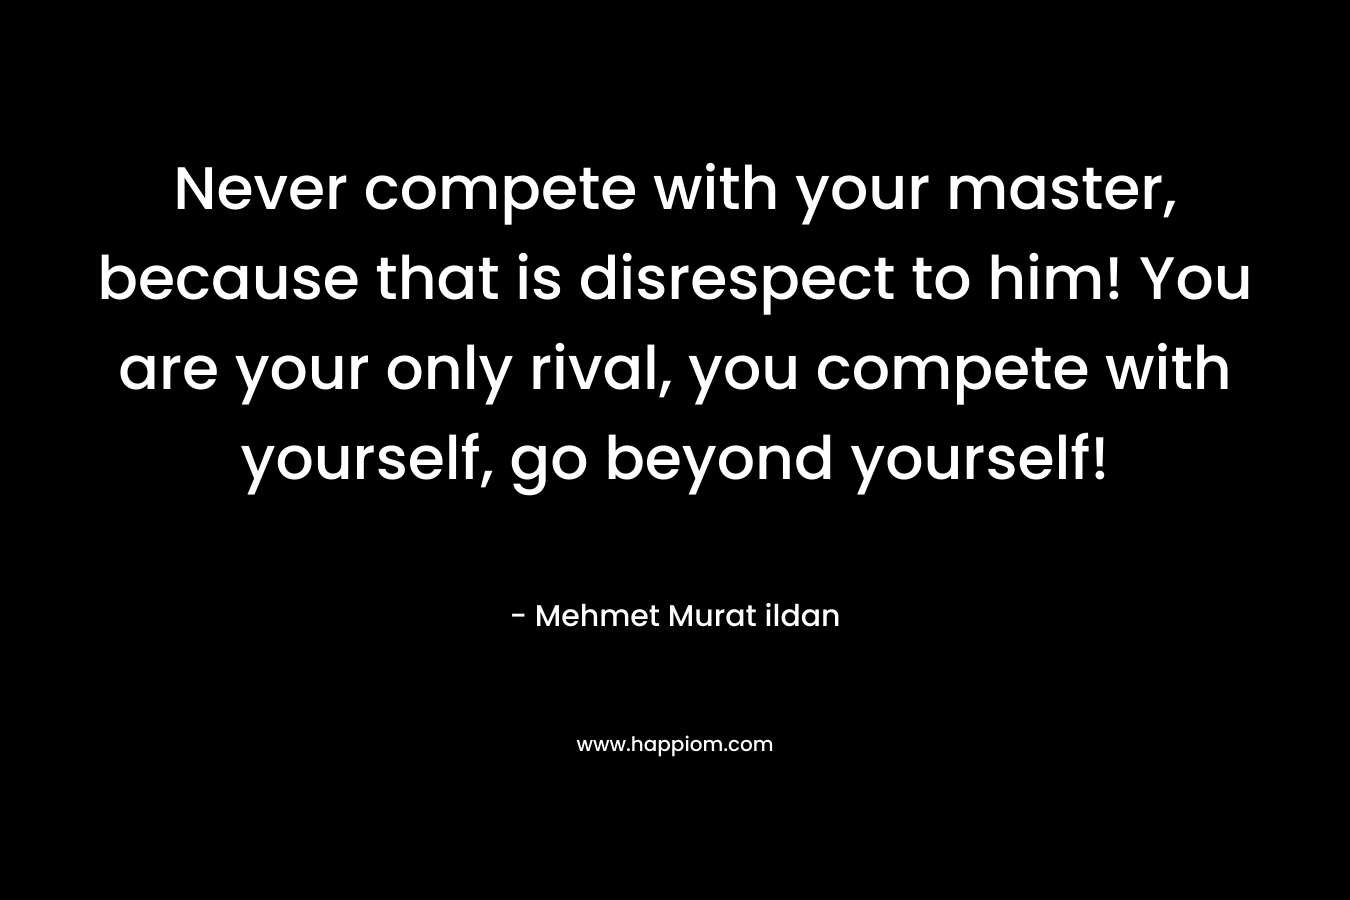 Never compete with your master, because that is disrespect to him! You are your only rival, you compete with yourself, go beyond yourself!